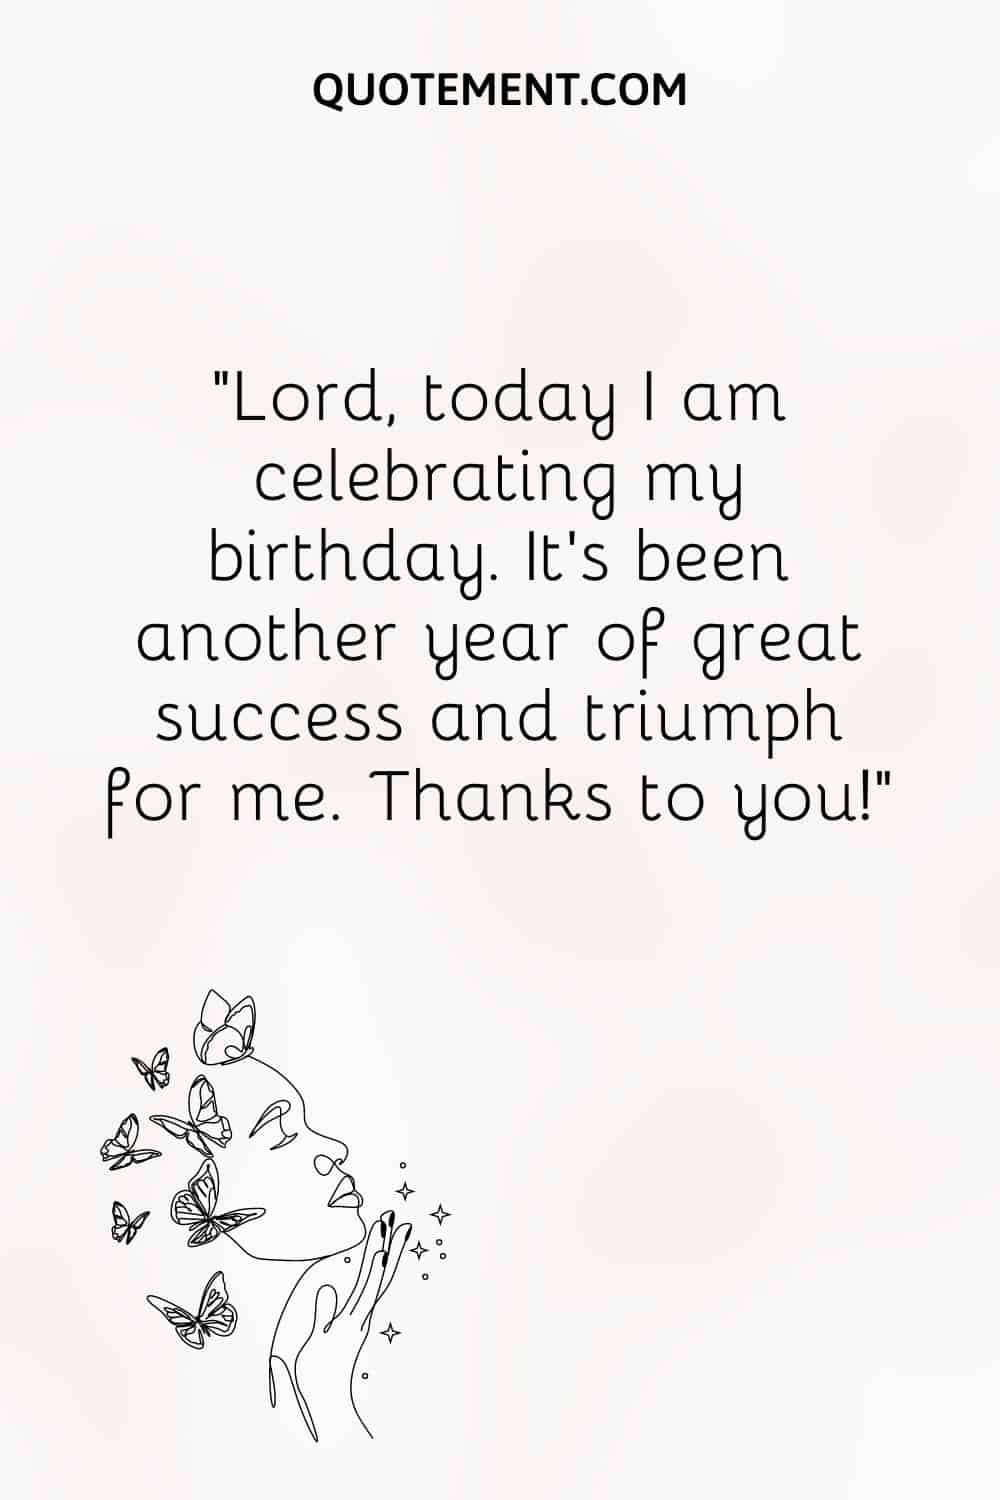 Lord, today I am celebrating my birthday. It’s been another year of great success and triumph for me.